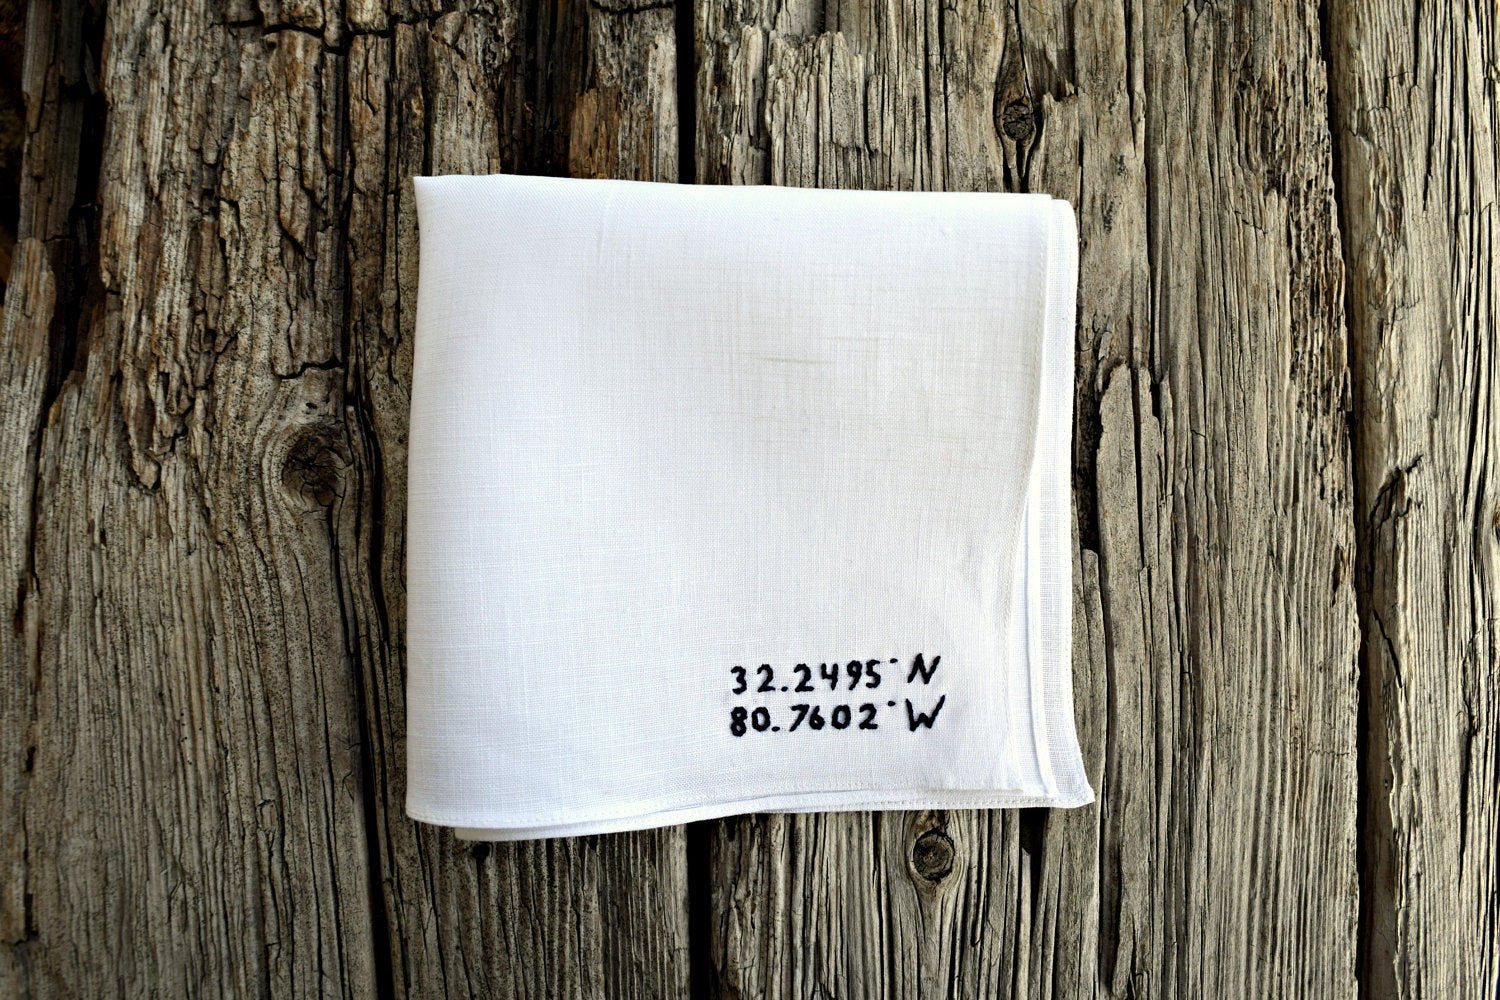 White linen handkerchief with GPS coordinates on wood background